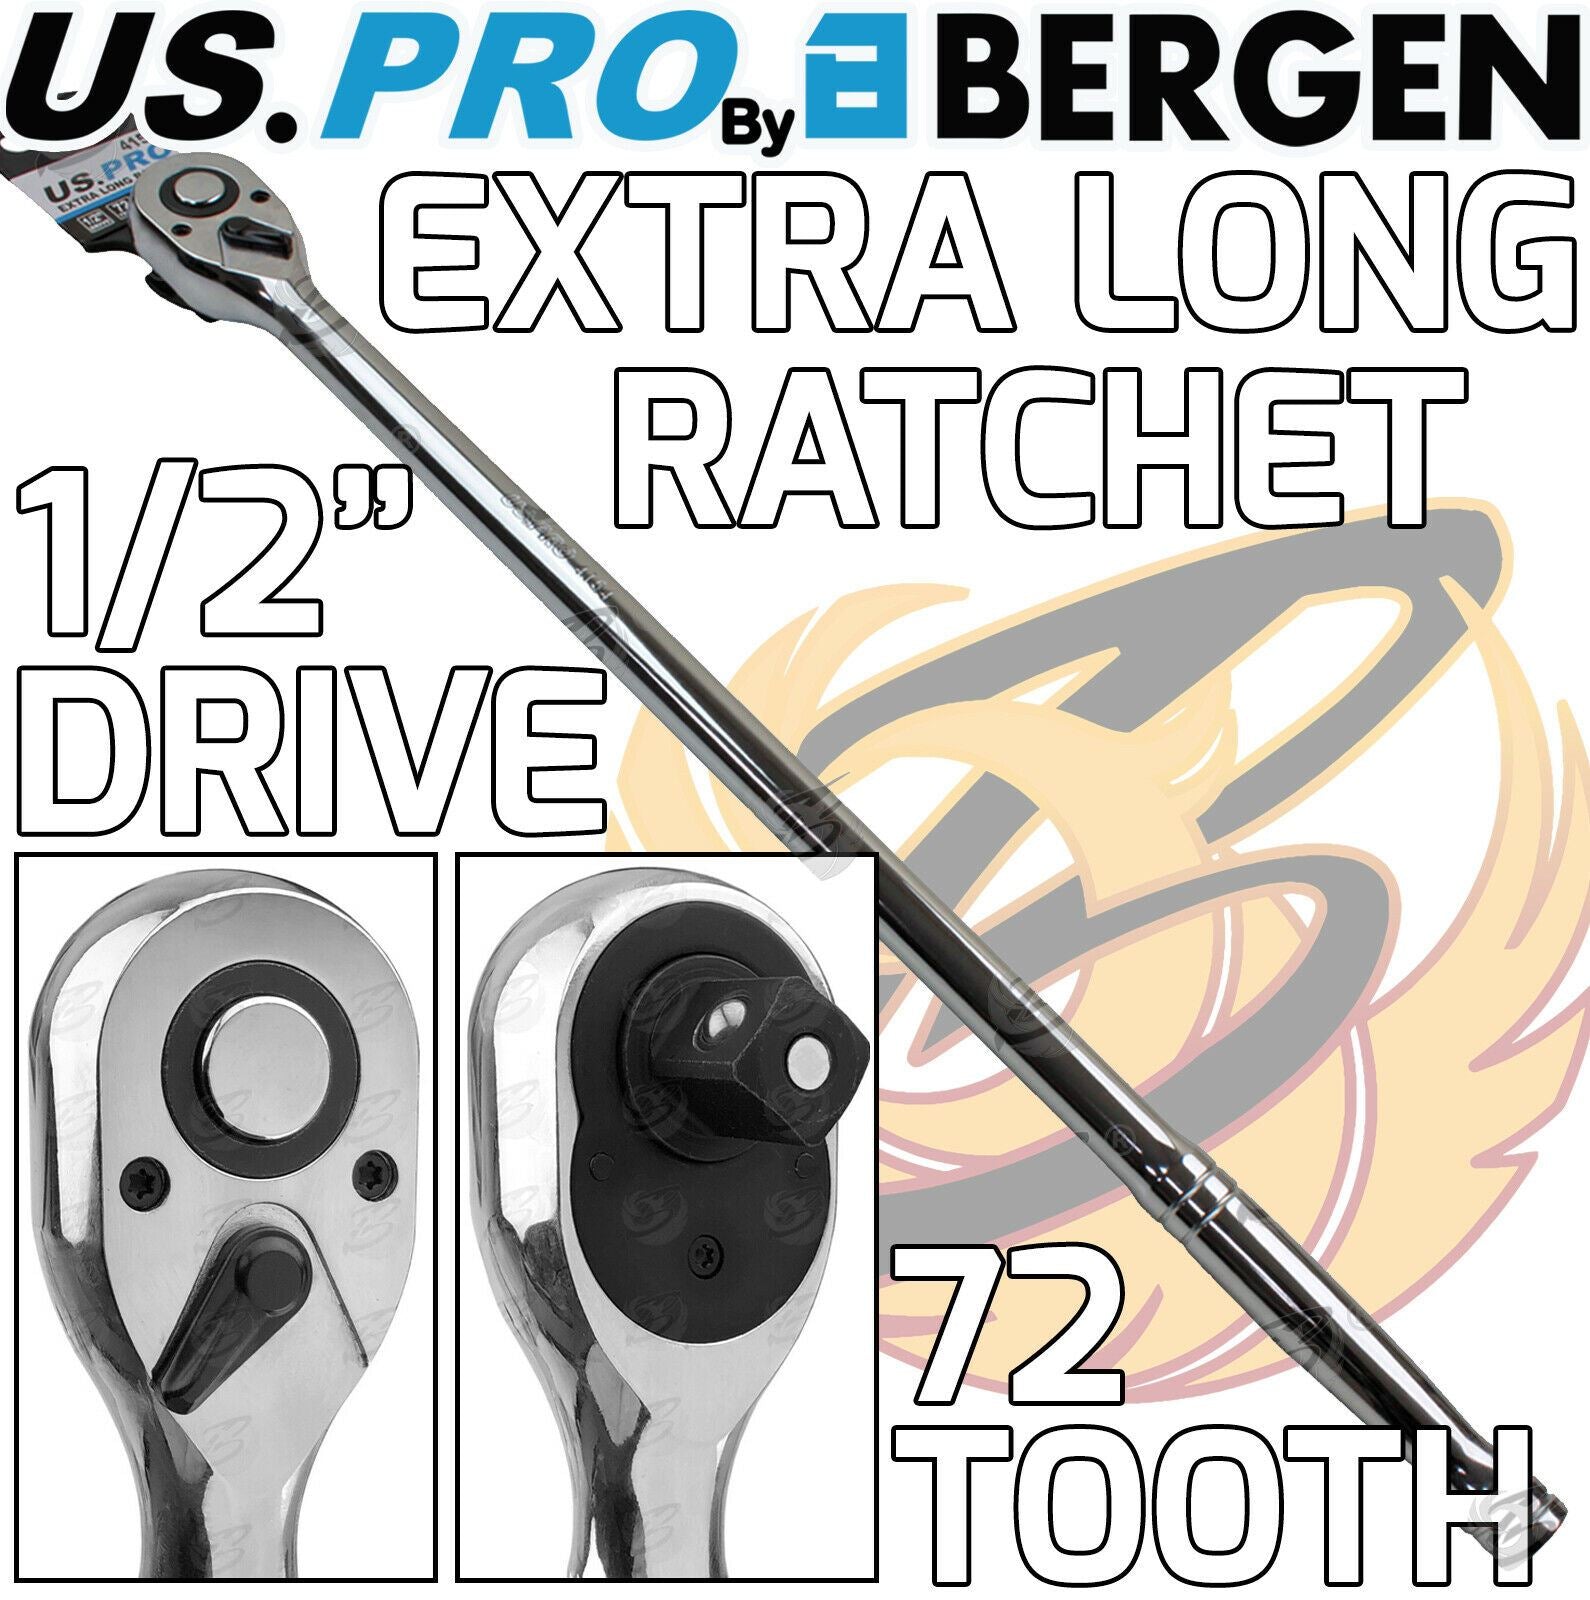 US PRO 1/2" DRIVE 72 TOOTH EXTRA LONG RATCHET HANDLE